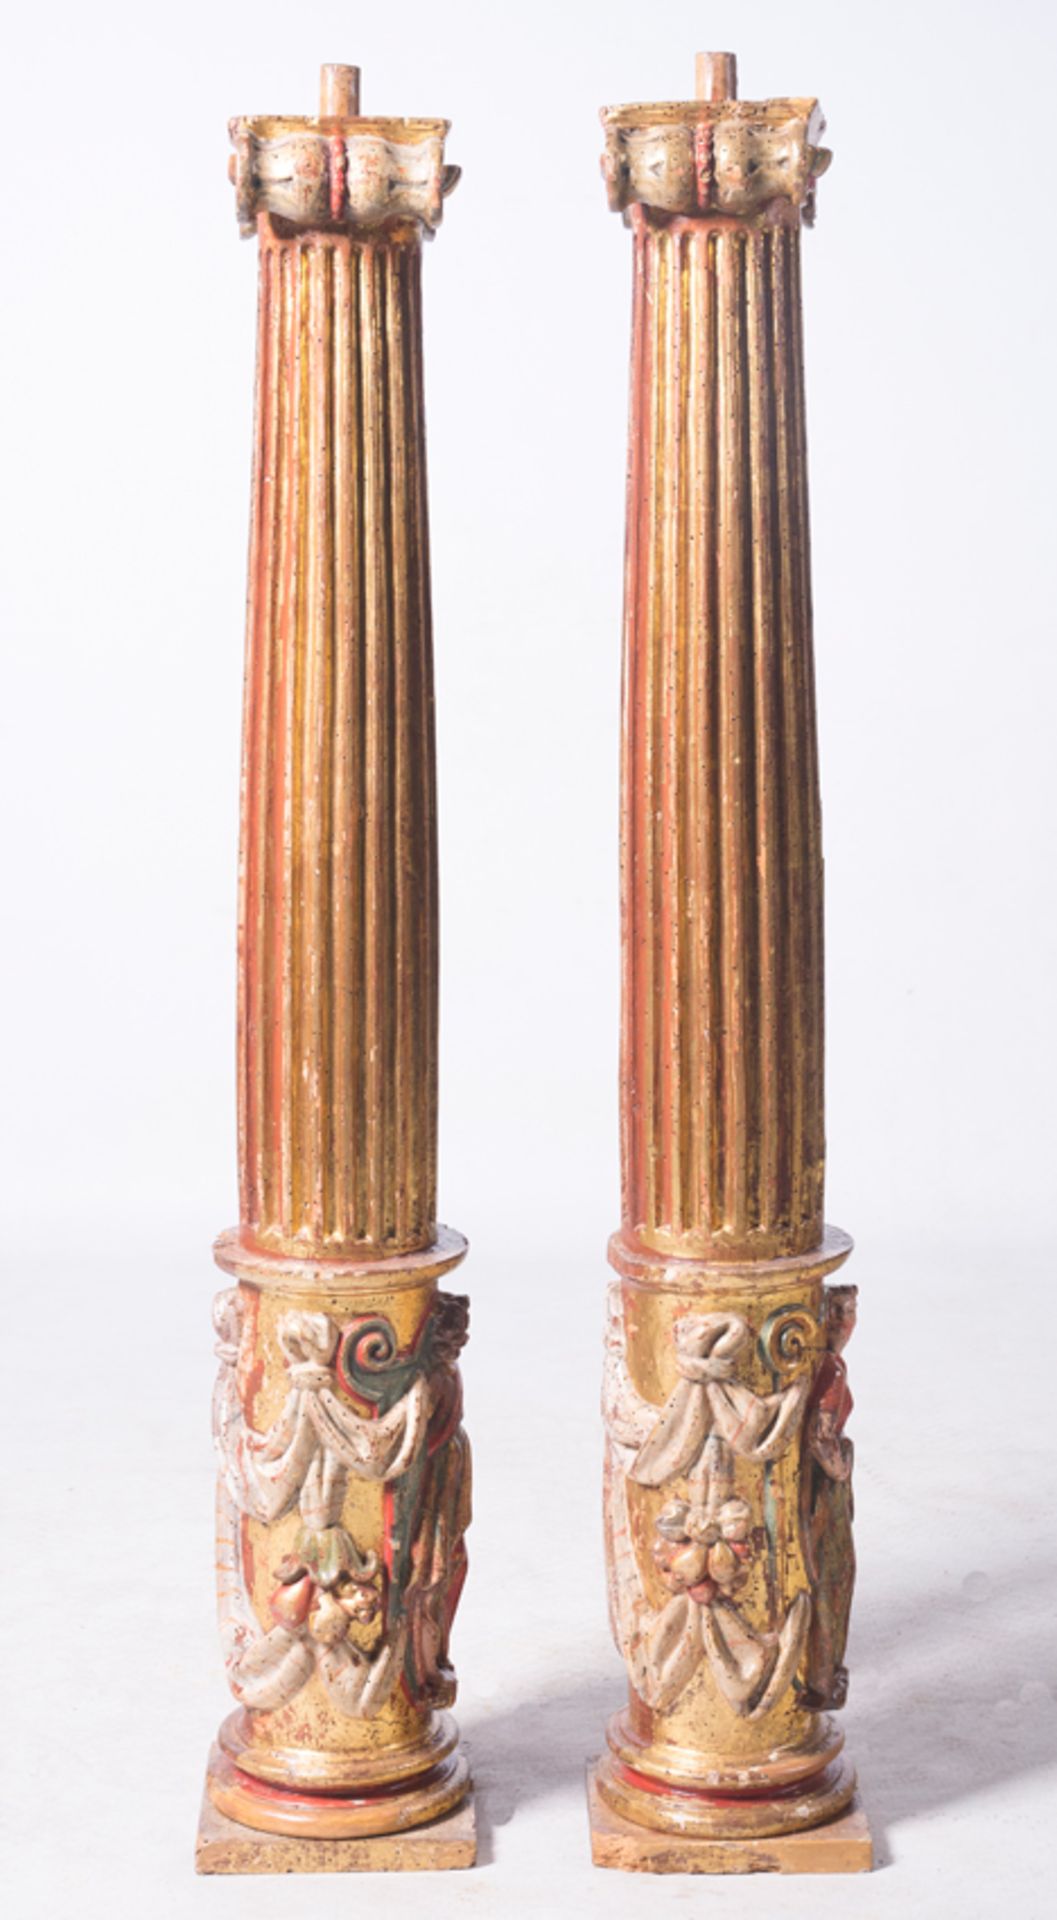 Pair of carved, gilded and polychromed wooden columns with human characters. Castilian School. Renai - Image 4 of 20